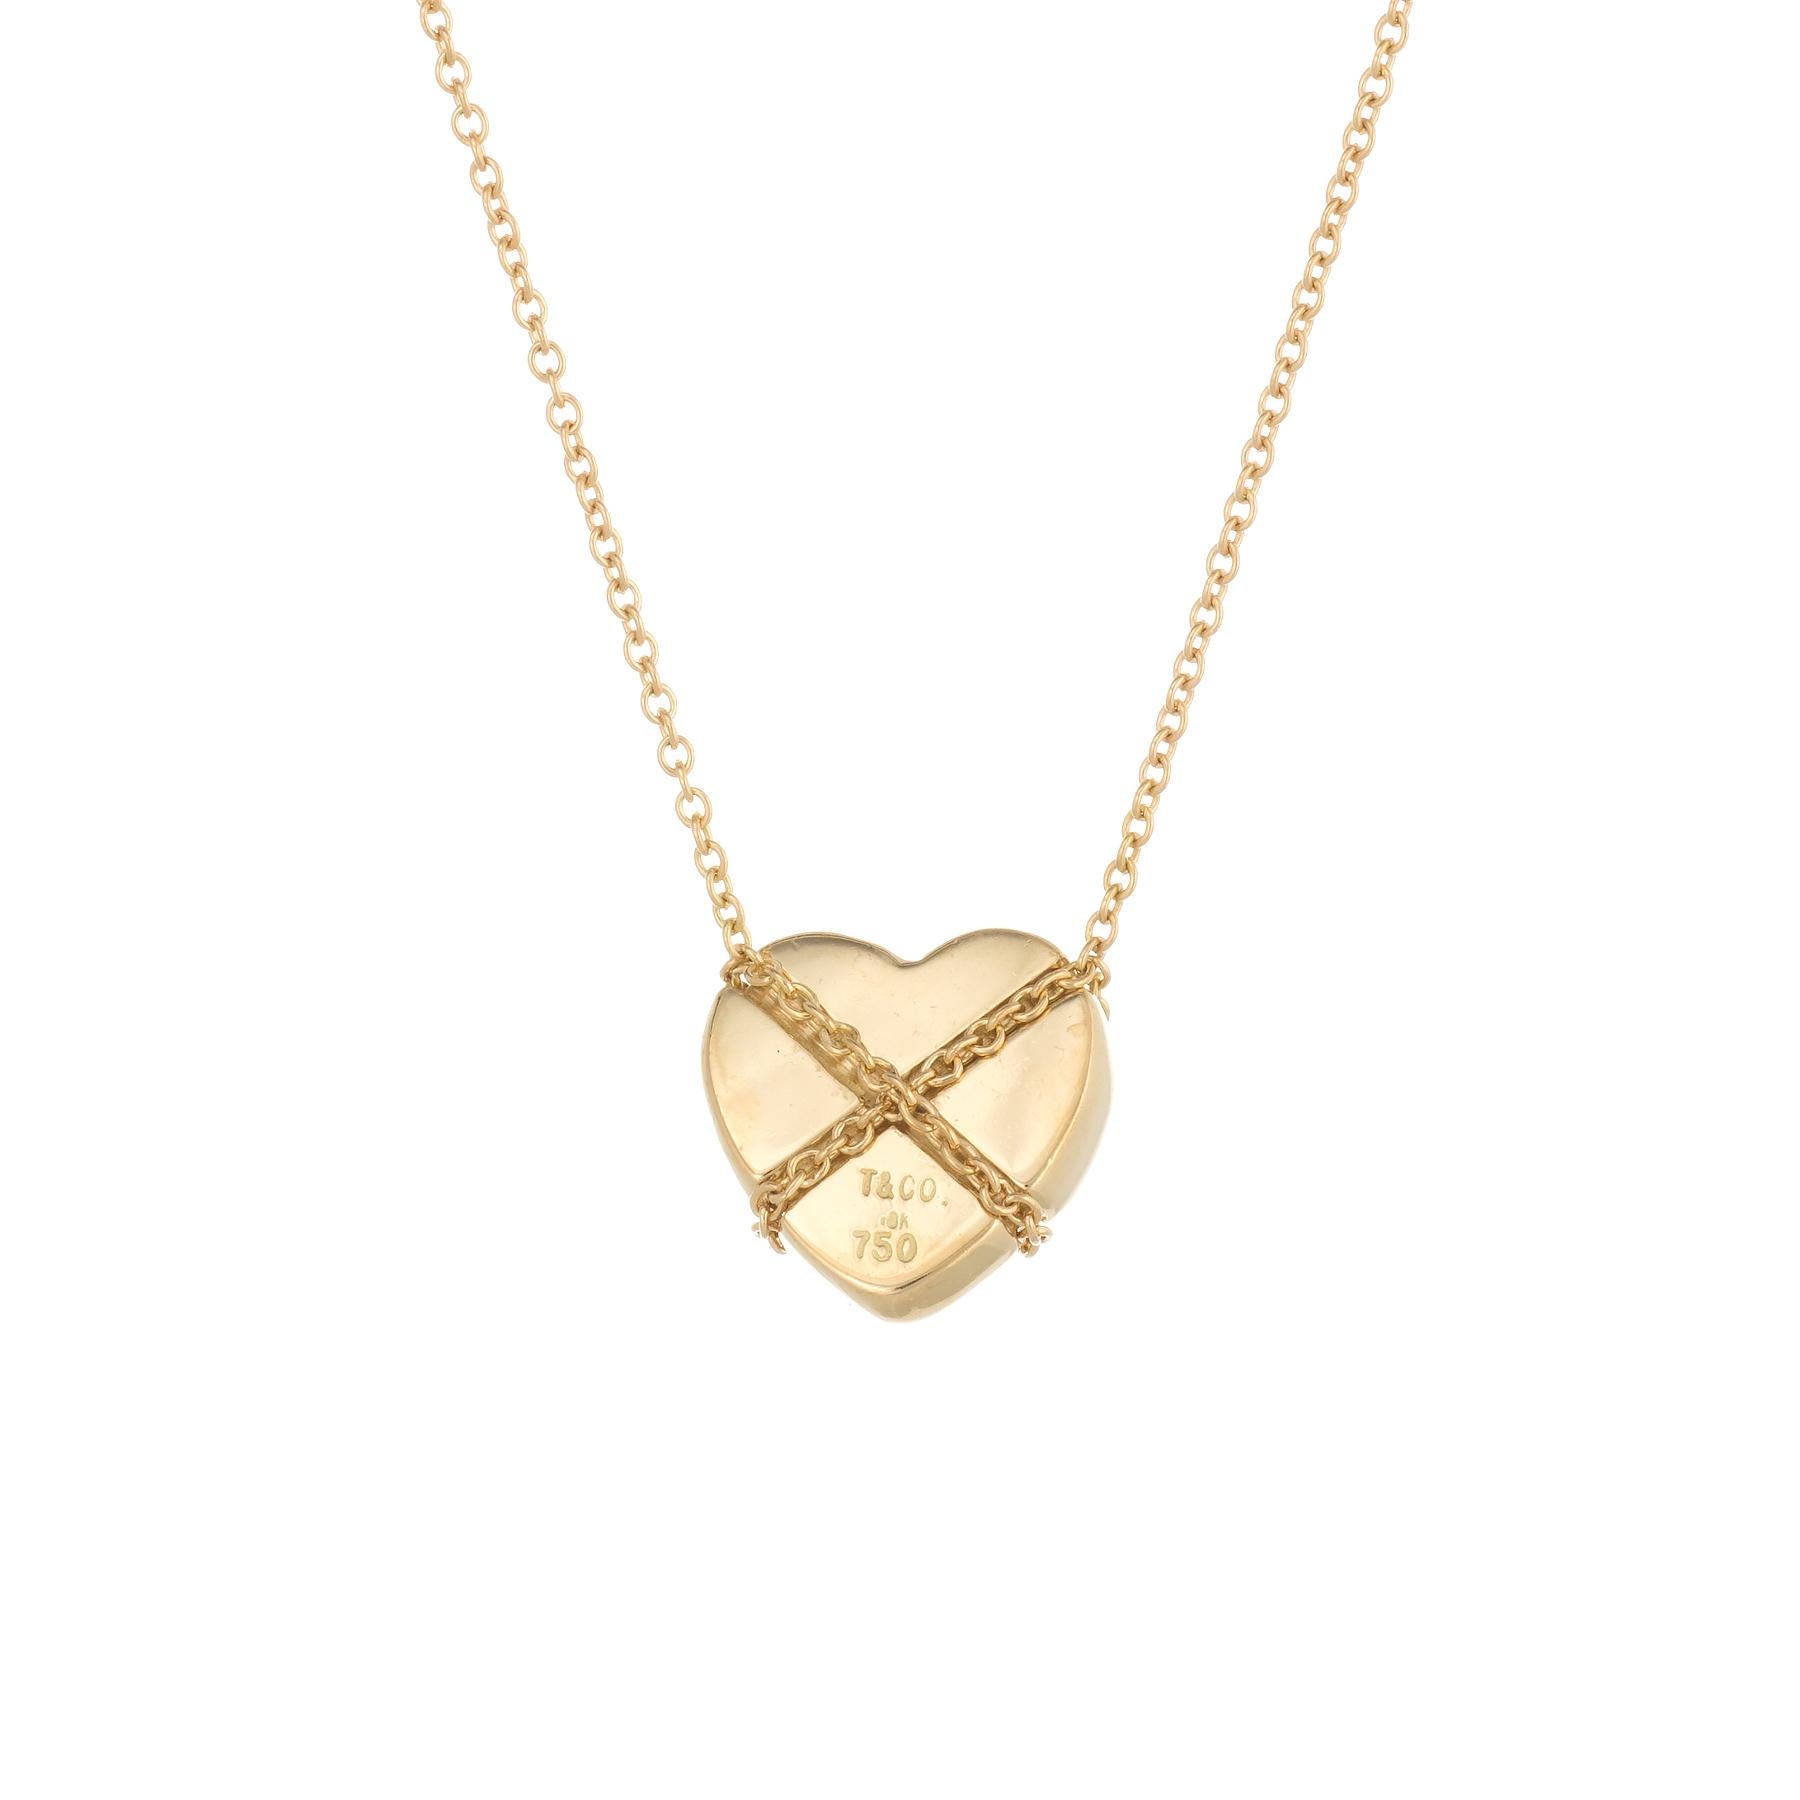 Elegant and finely detailed vintage Tiffany & Co Cross My Heart necklace, crafted in 18 karat yellow gold.  

The necklace is a retired piece and no longer made by Tiffany & Co.

The necklace is in excellent original condition.